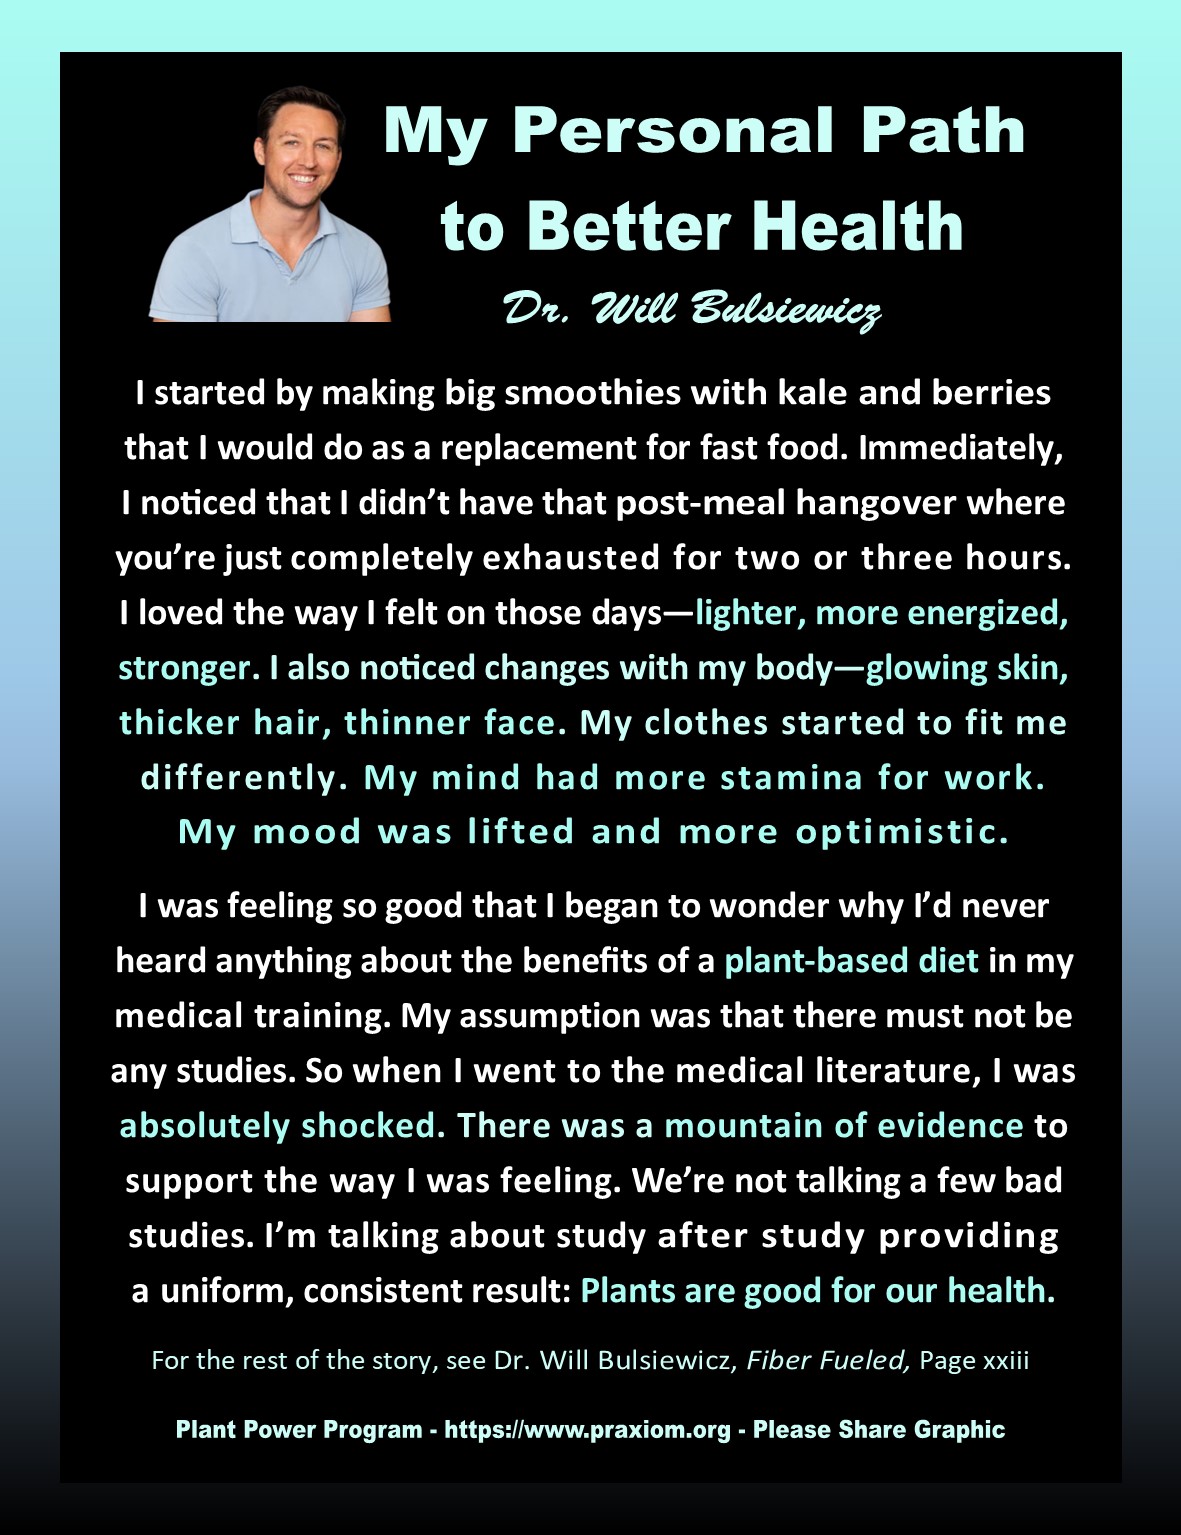 Dr. Bulsiewicz's Path to Better Health